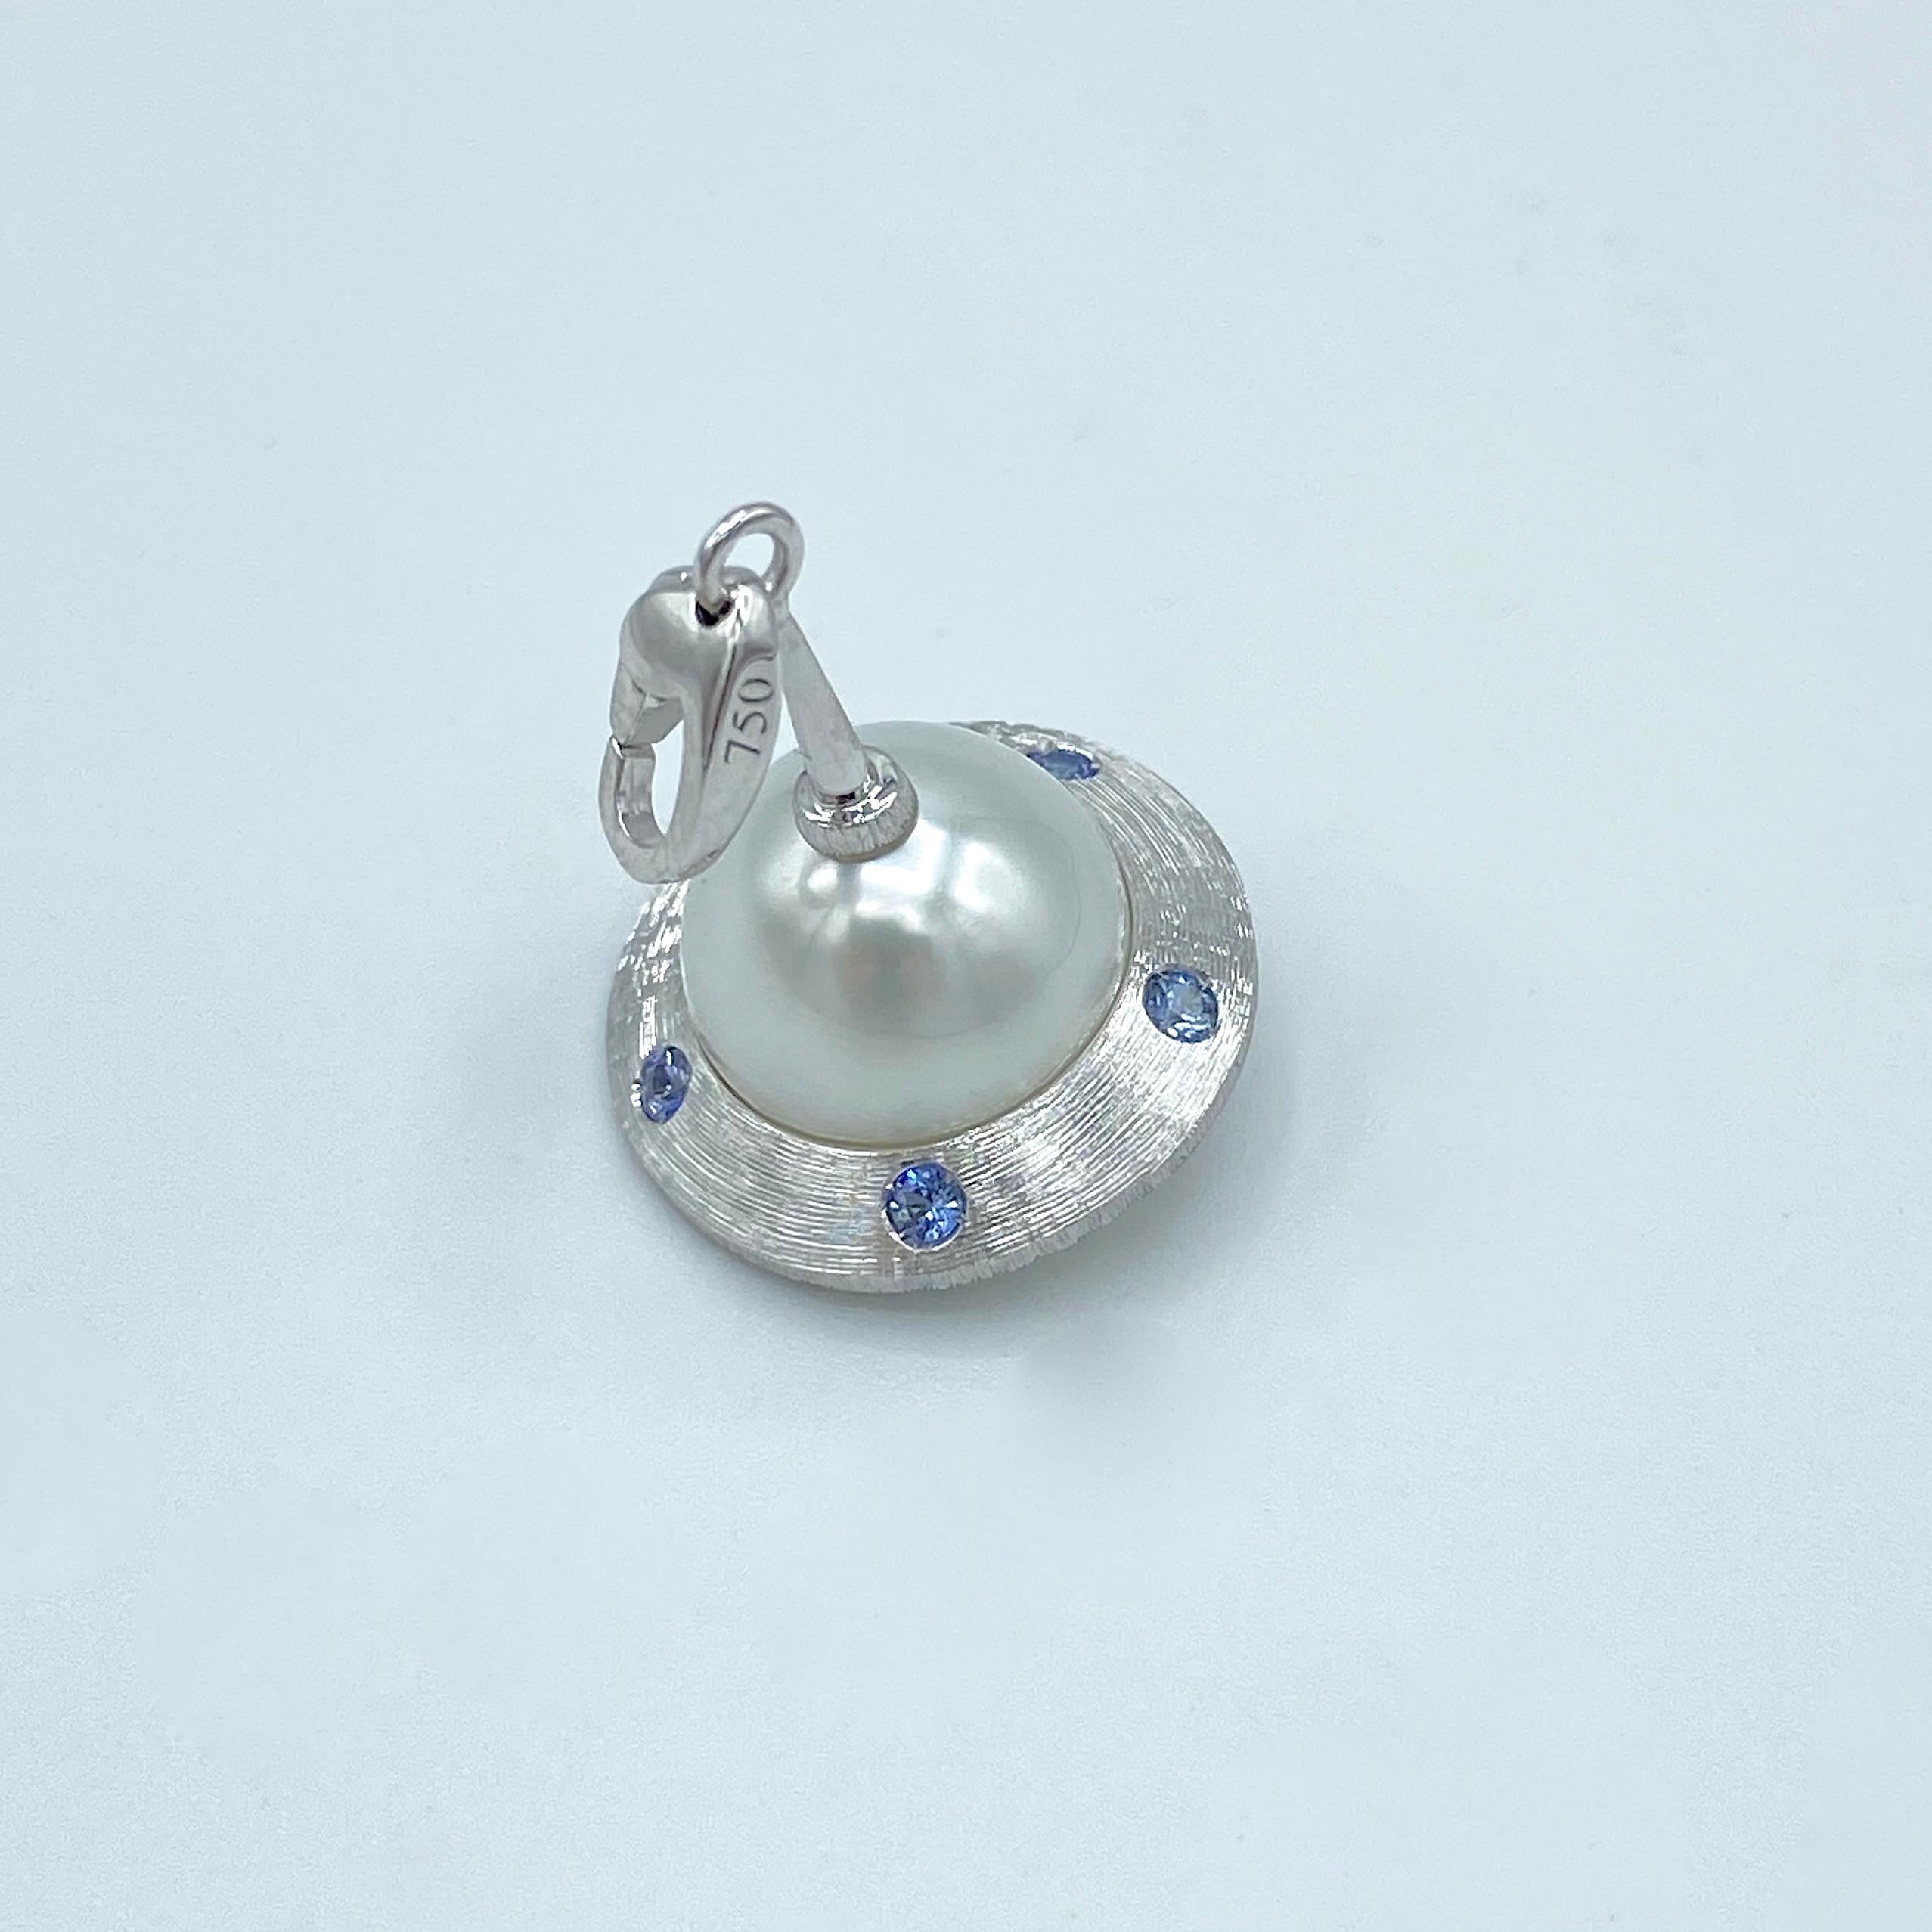 Flying Saucer Blue Sapphire Australian Pearl 18KT Gold Pendant Necklace or Charm

I use a n Australian lightly button pearl (mm 11x12,5) to make a flying saucer.
The white gold structure is engraved by hand and has 5 blue sapphires and in total they